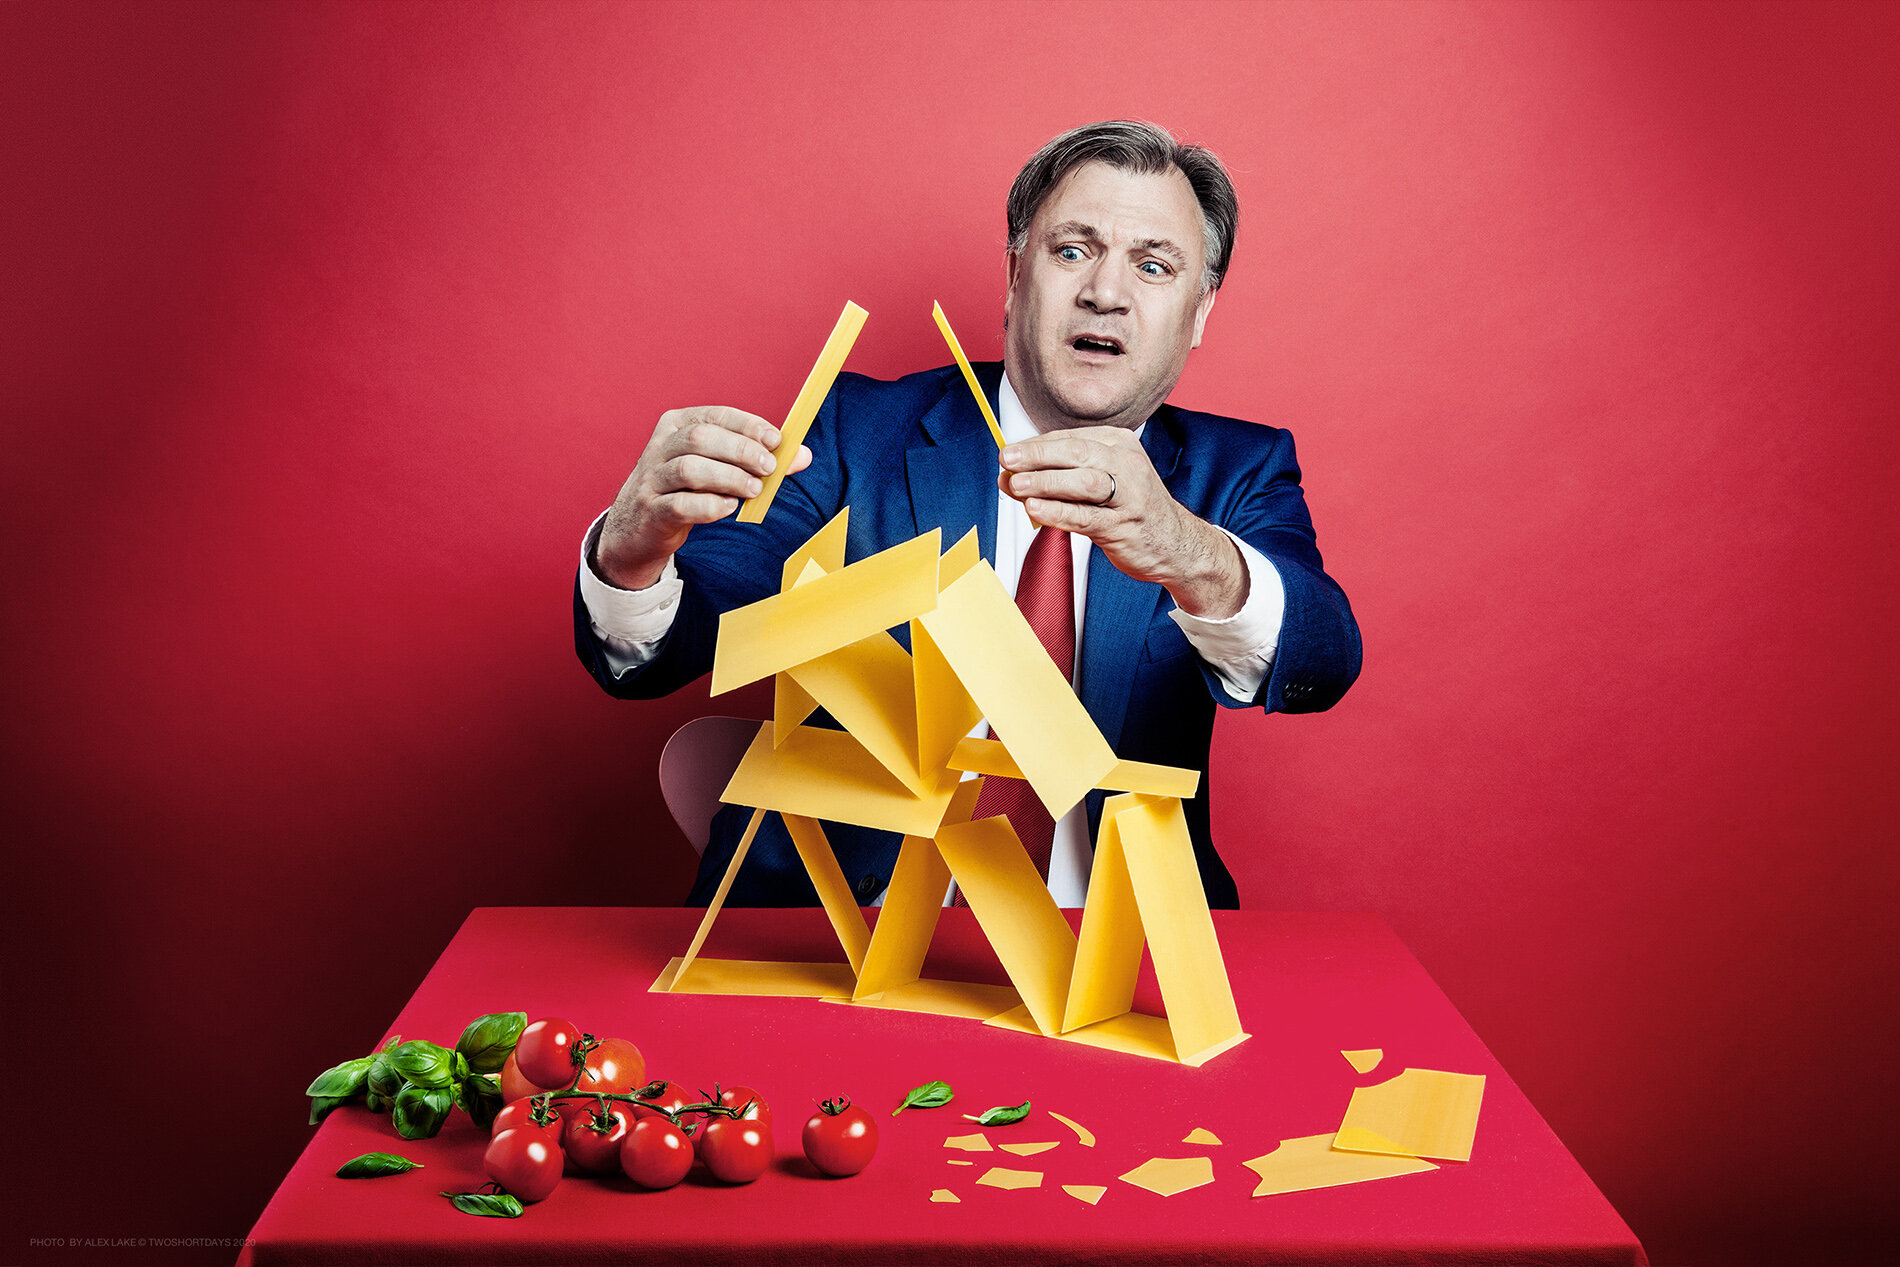 ed_balls_photography_copyright_ALEX_LAKE_do_not_reproduce_without_permission_TWOSHORTDAYS.jpg